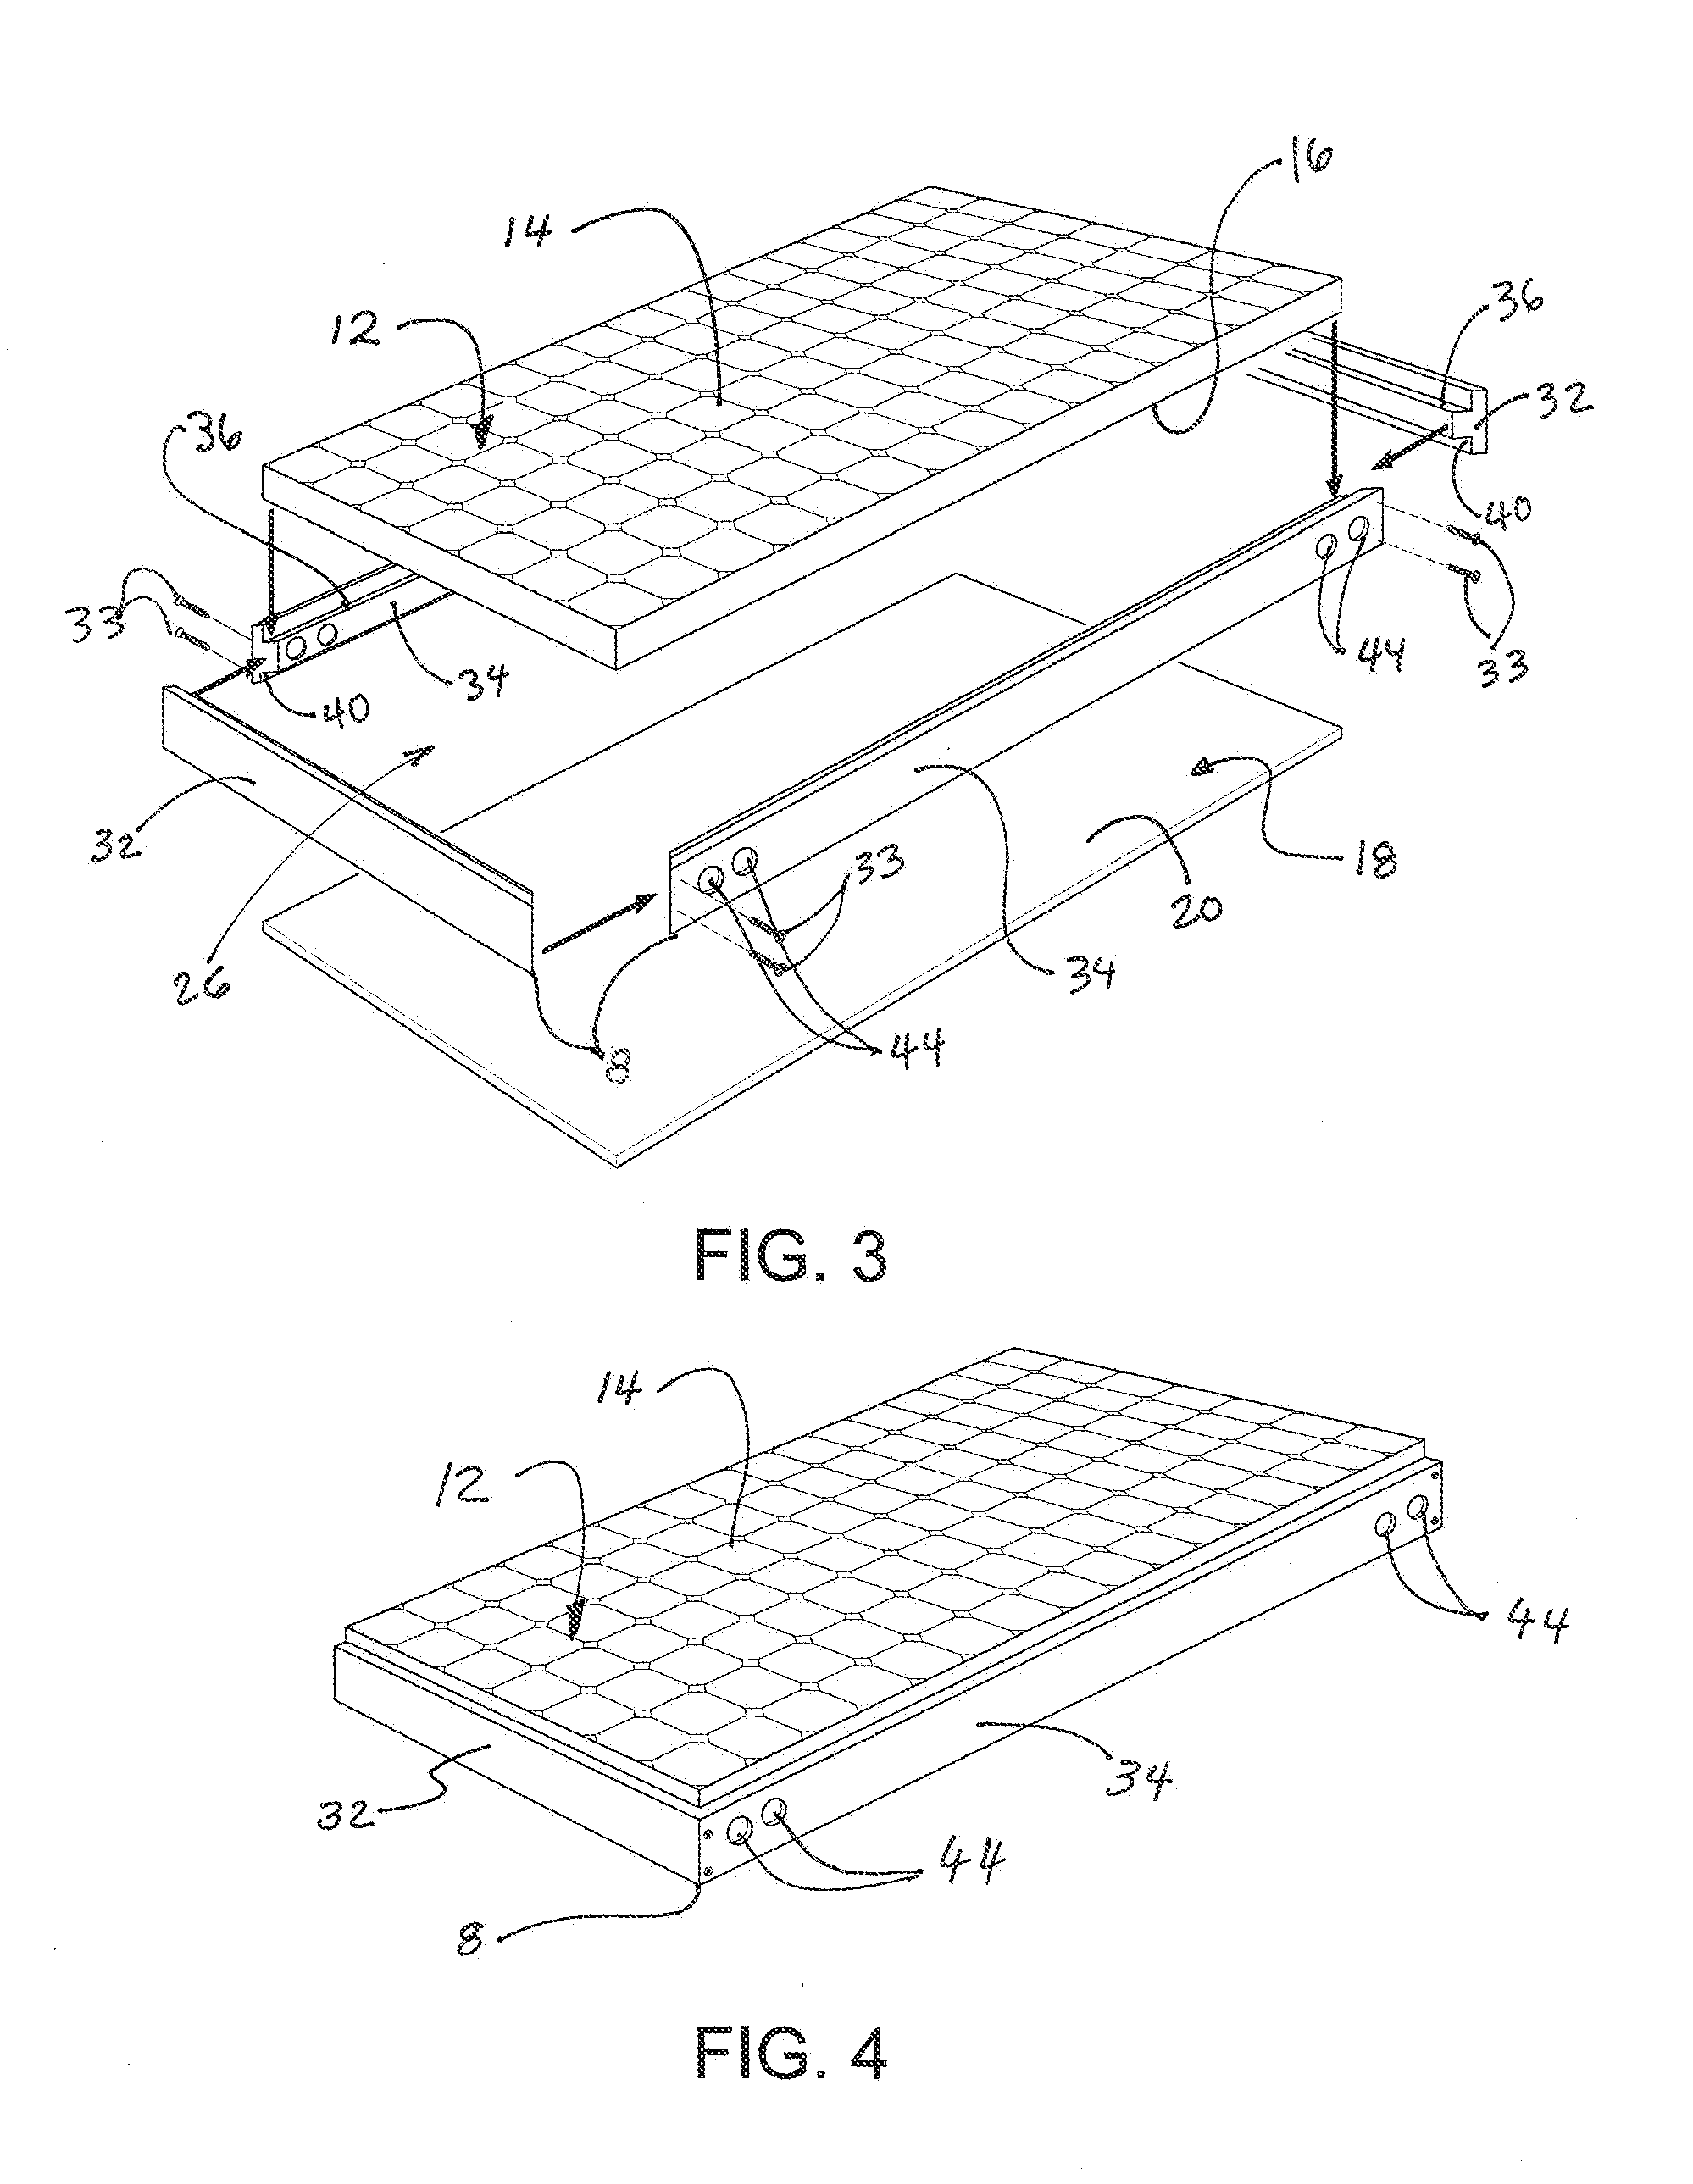 Solar hybrid photovoltaic-thermal collector assembly and method of use